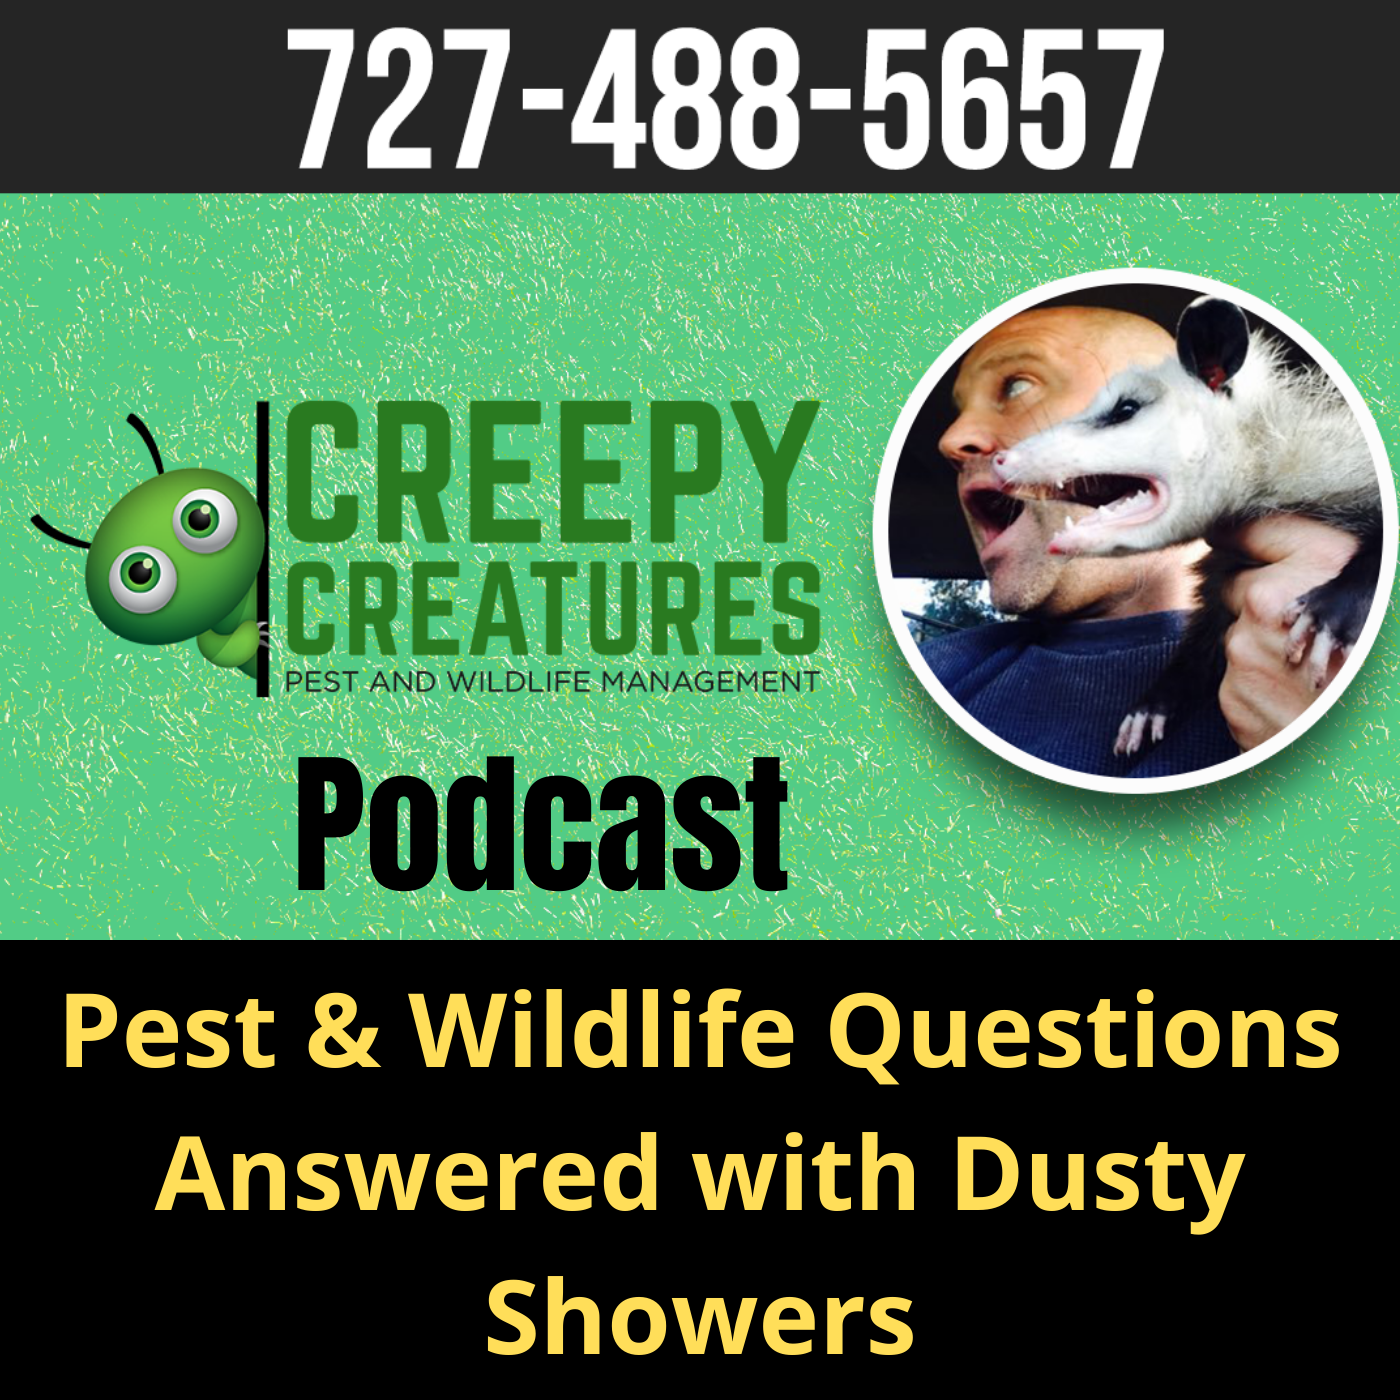 Creepy Creatures Podcast with Dusty Showers